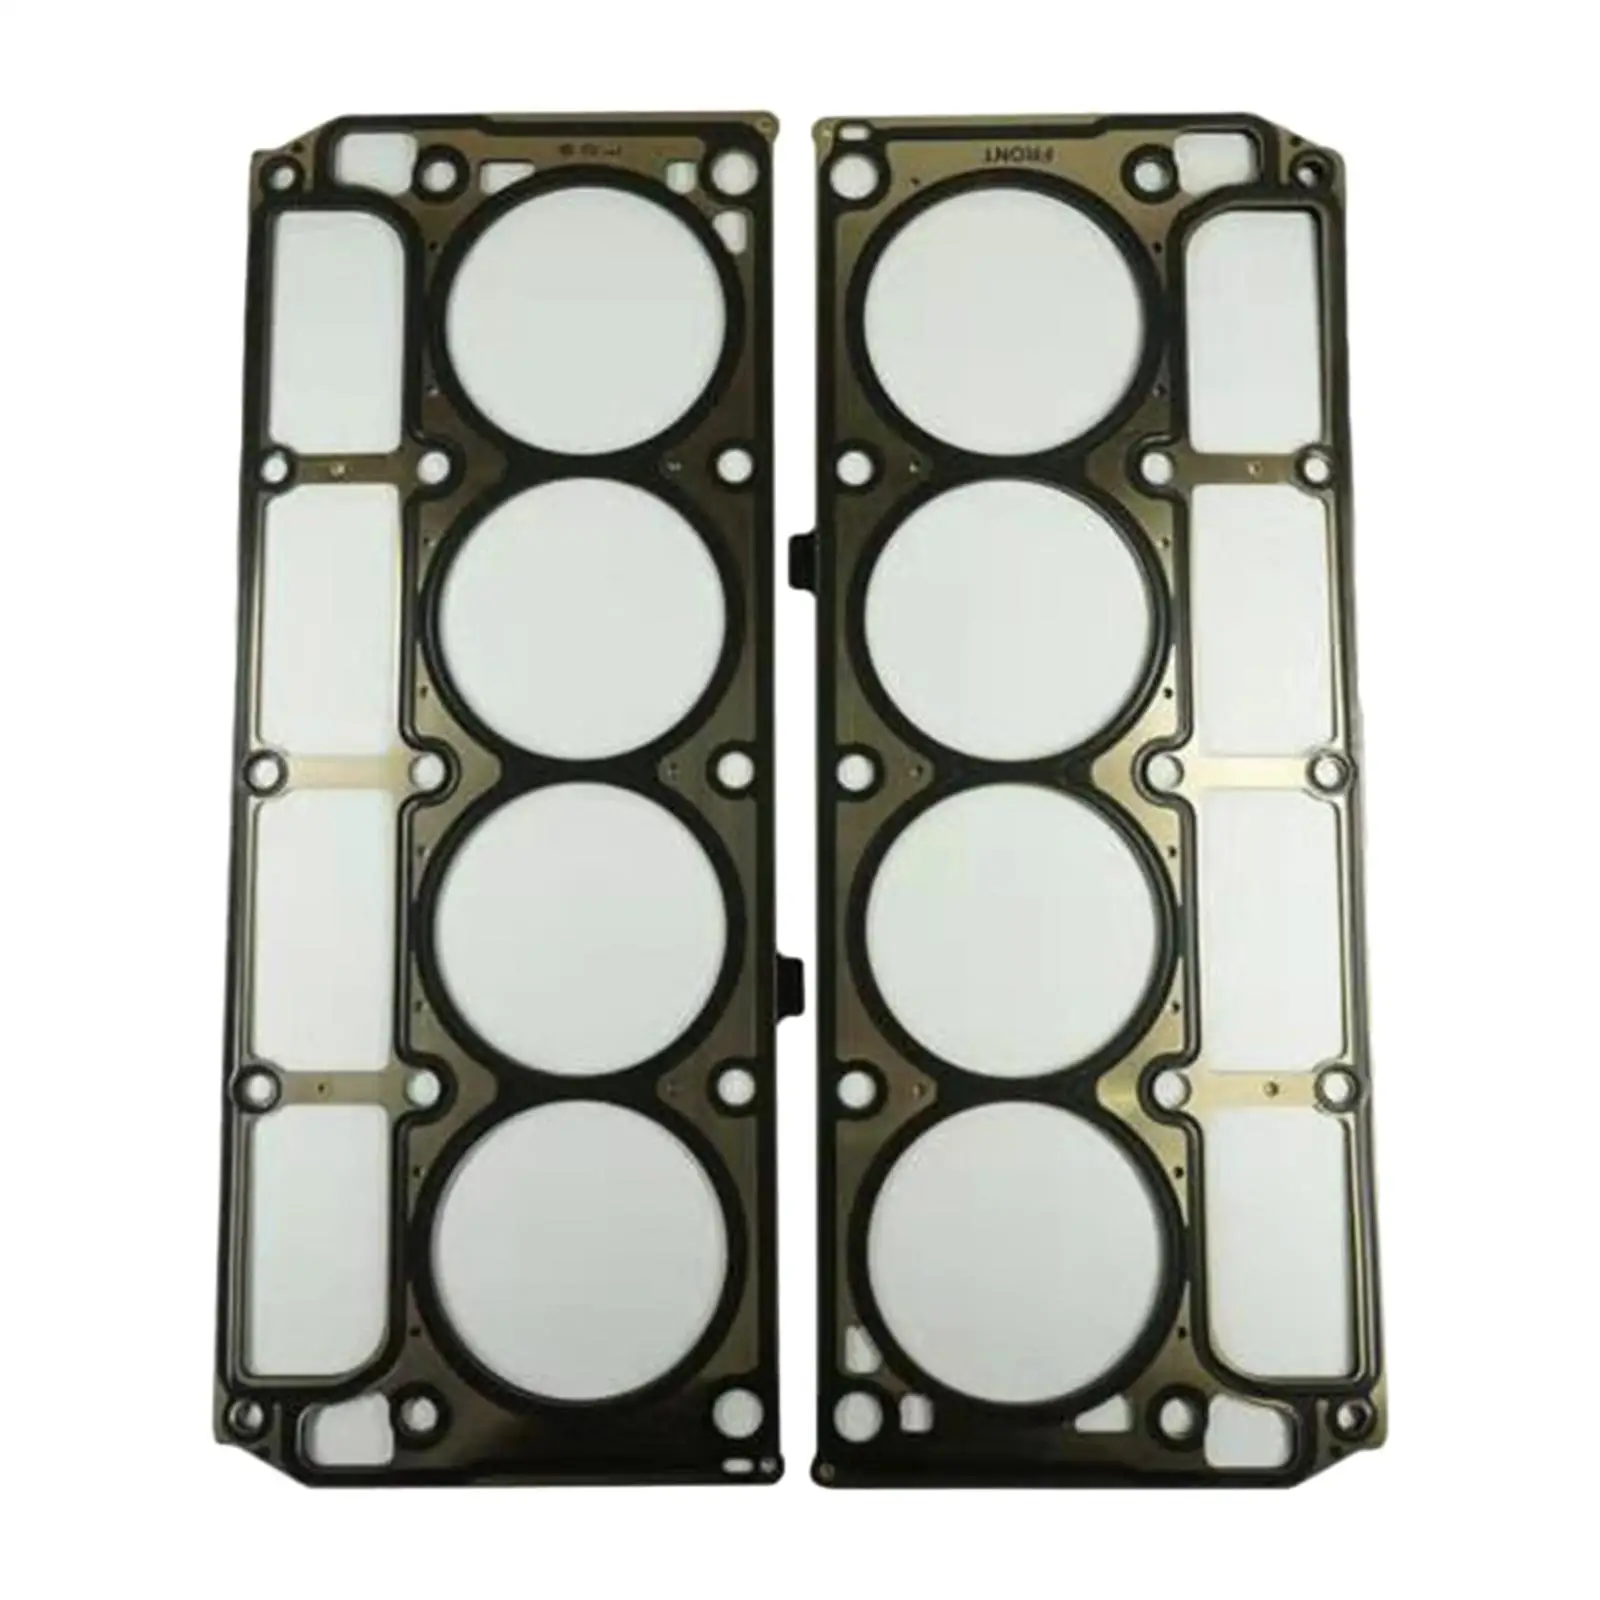 Automobile  Cylinder Head Gaskets 12622033 0 Bore Gaskets Set for 2009-2015 6.0L & 6.2L for Engines